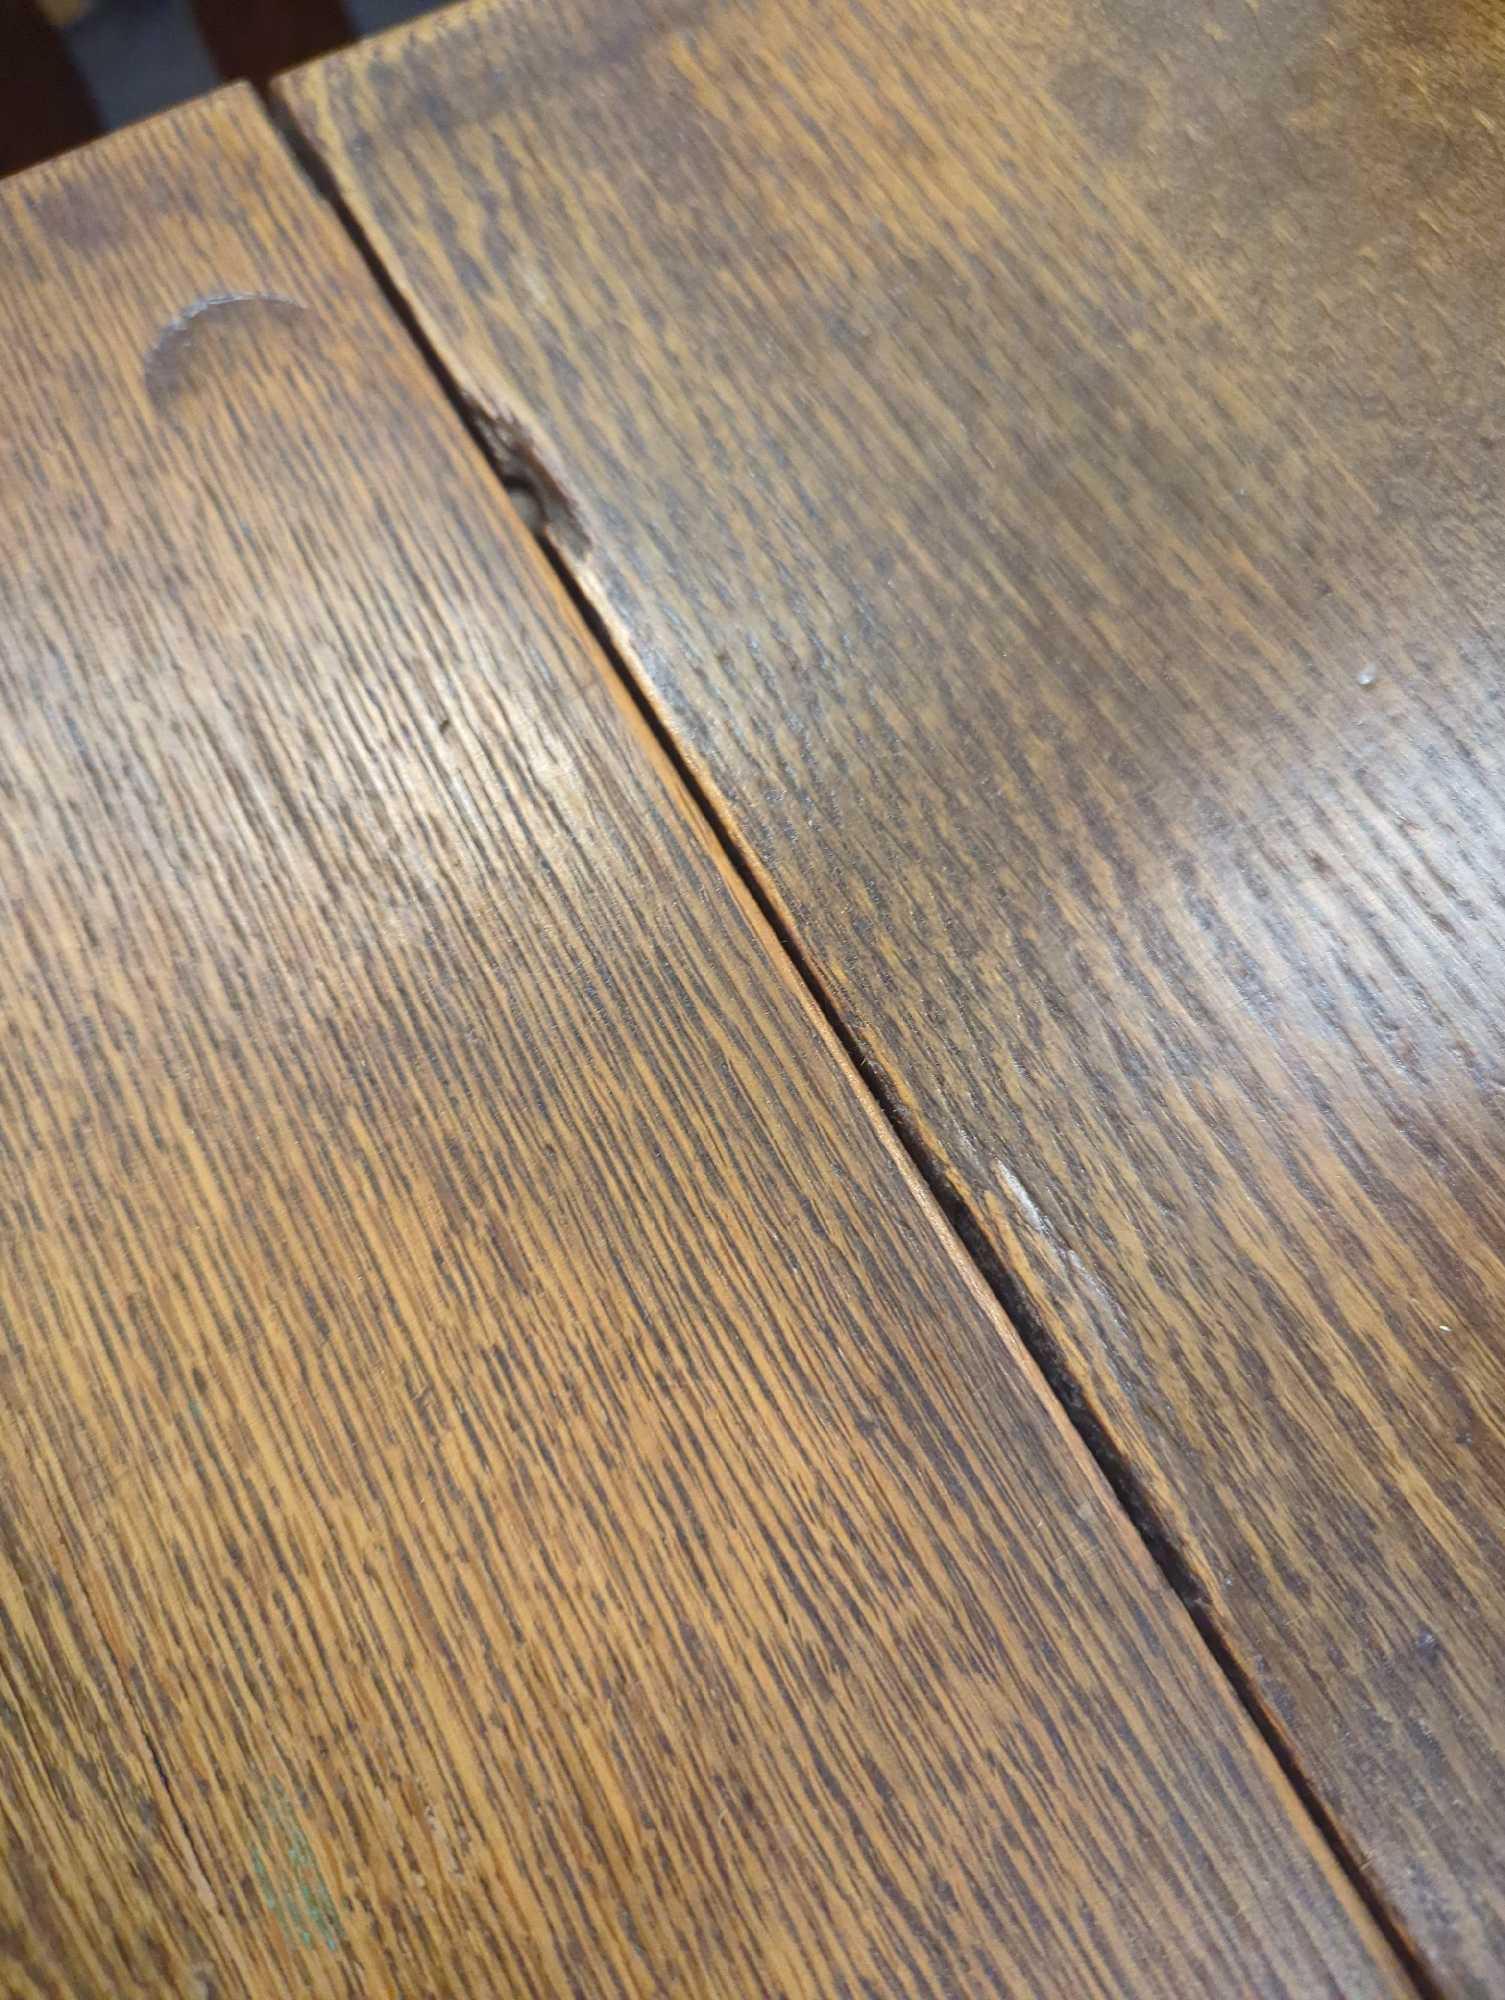 1910s American Square Oak Dining Table With Claw Feet, Come With 2 Leaves, Measure Approximately 41